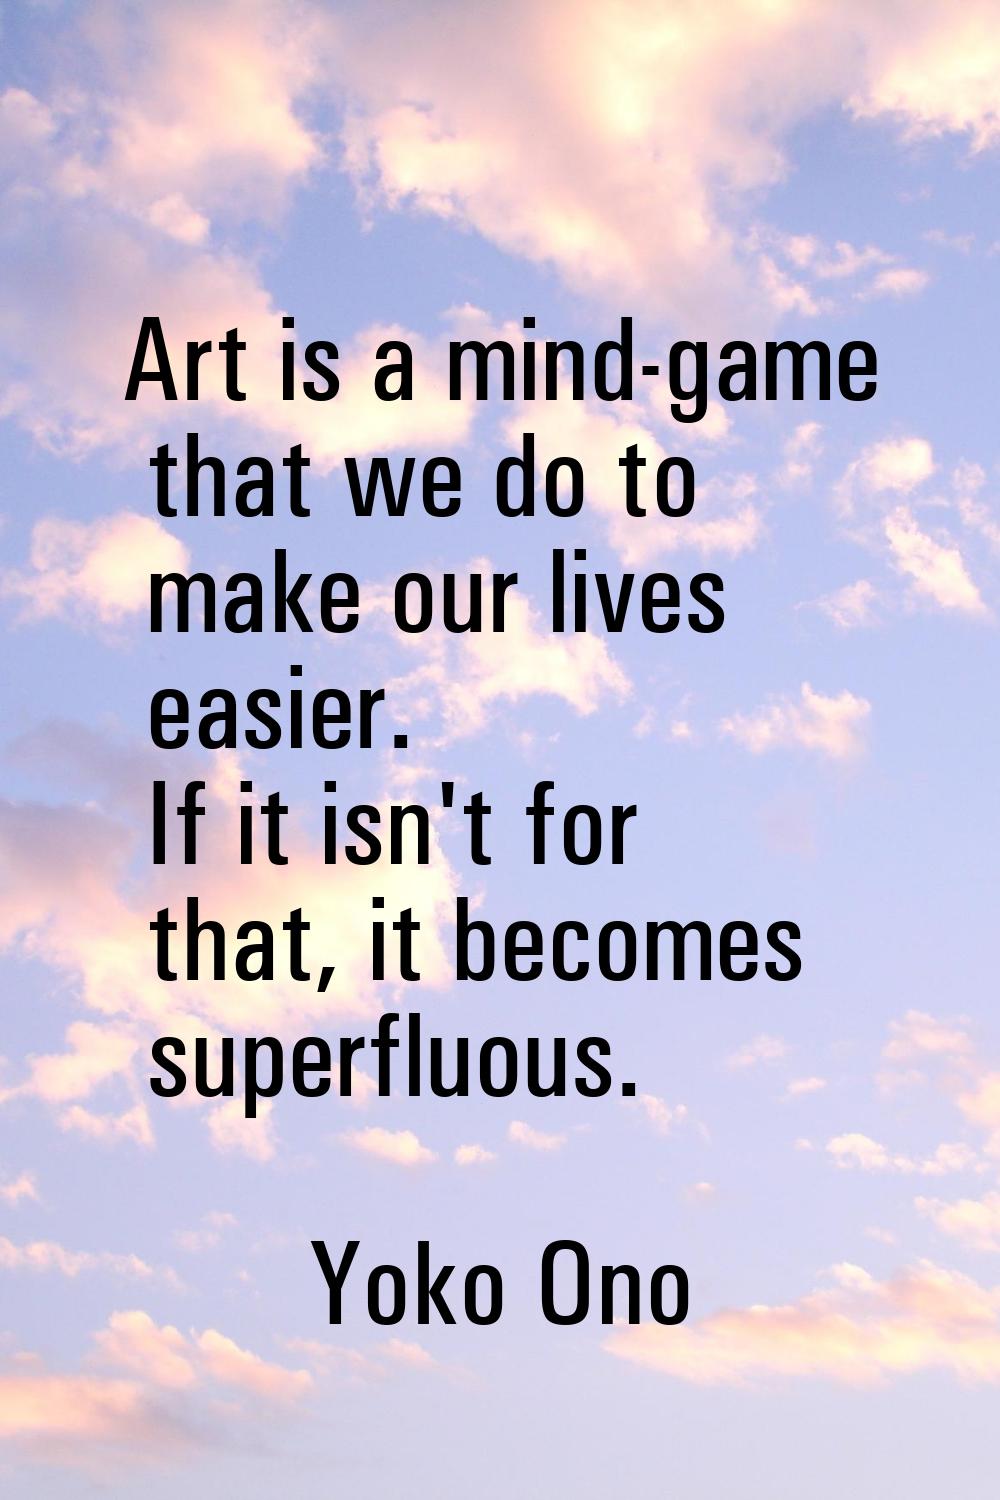 Art is a mind-game that we do to make our lives easier. If it isn't for that, it becomes superfluou